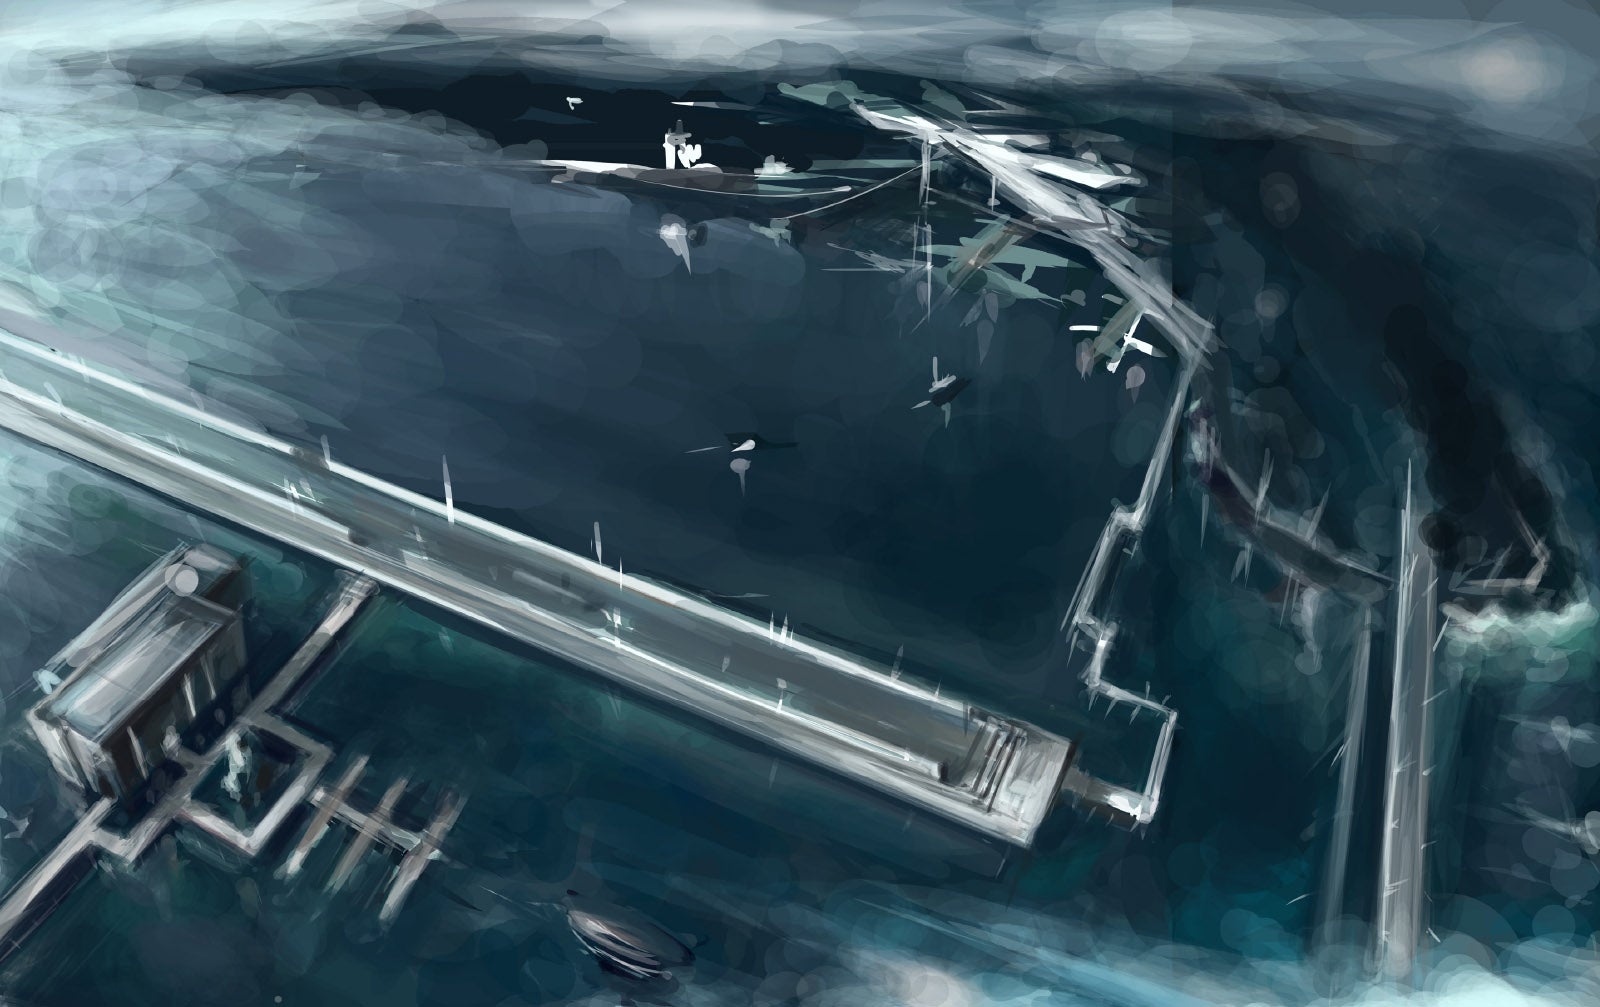 A digital painting rendition of the island from an aerial view.